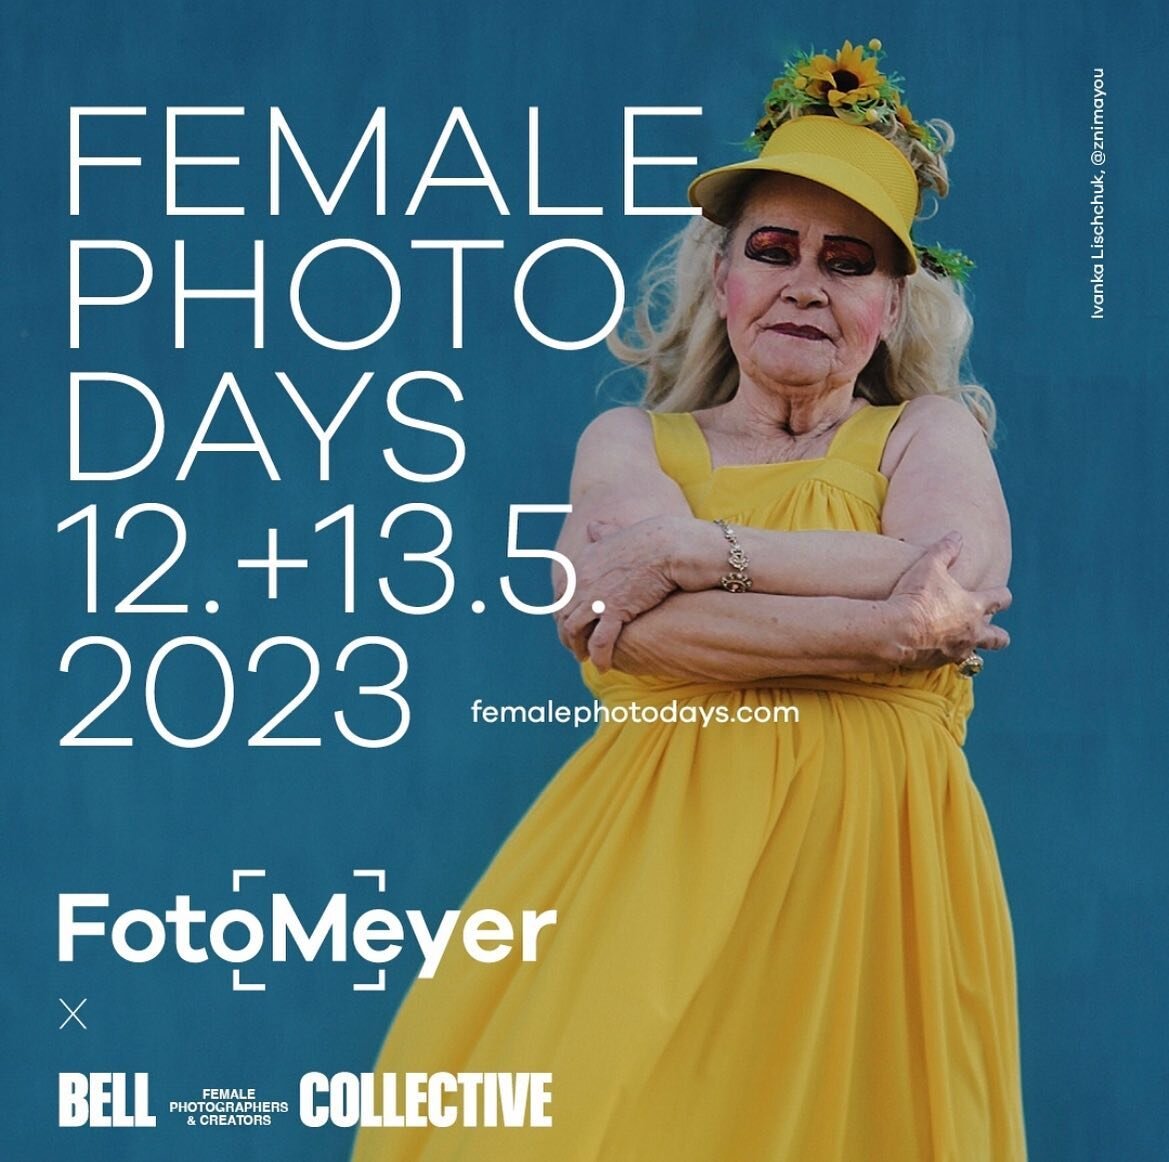 ❗️ ATTENTION BERLIN ❗️

 From May 12-13, 2023, @bellcollective and @fotomeyer are hosting a two-day workshop event, the FEMALE PHOTO DAYS, including a photo exhibition focused on the work of female photographers.

 With the motto &ldquo;By Women for 